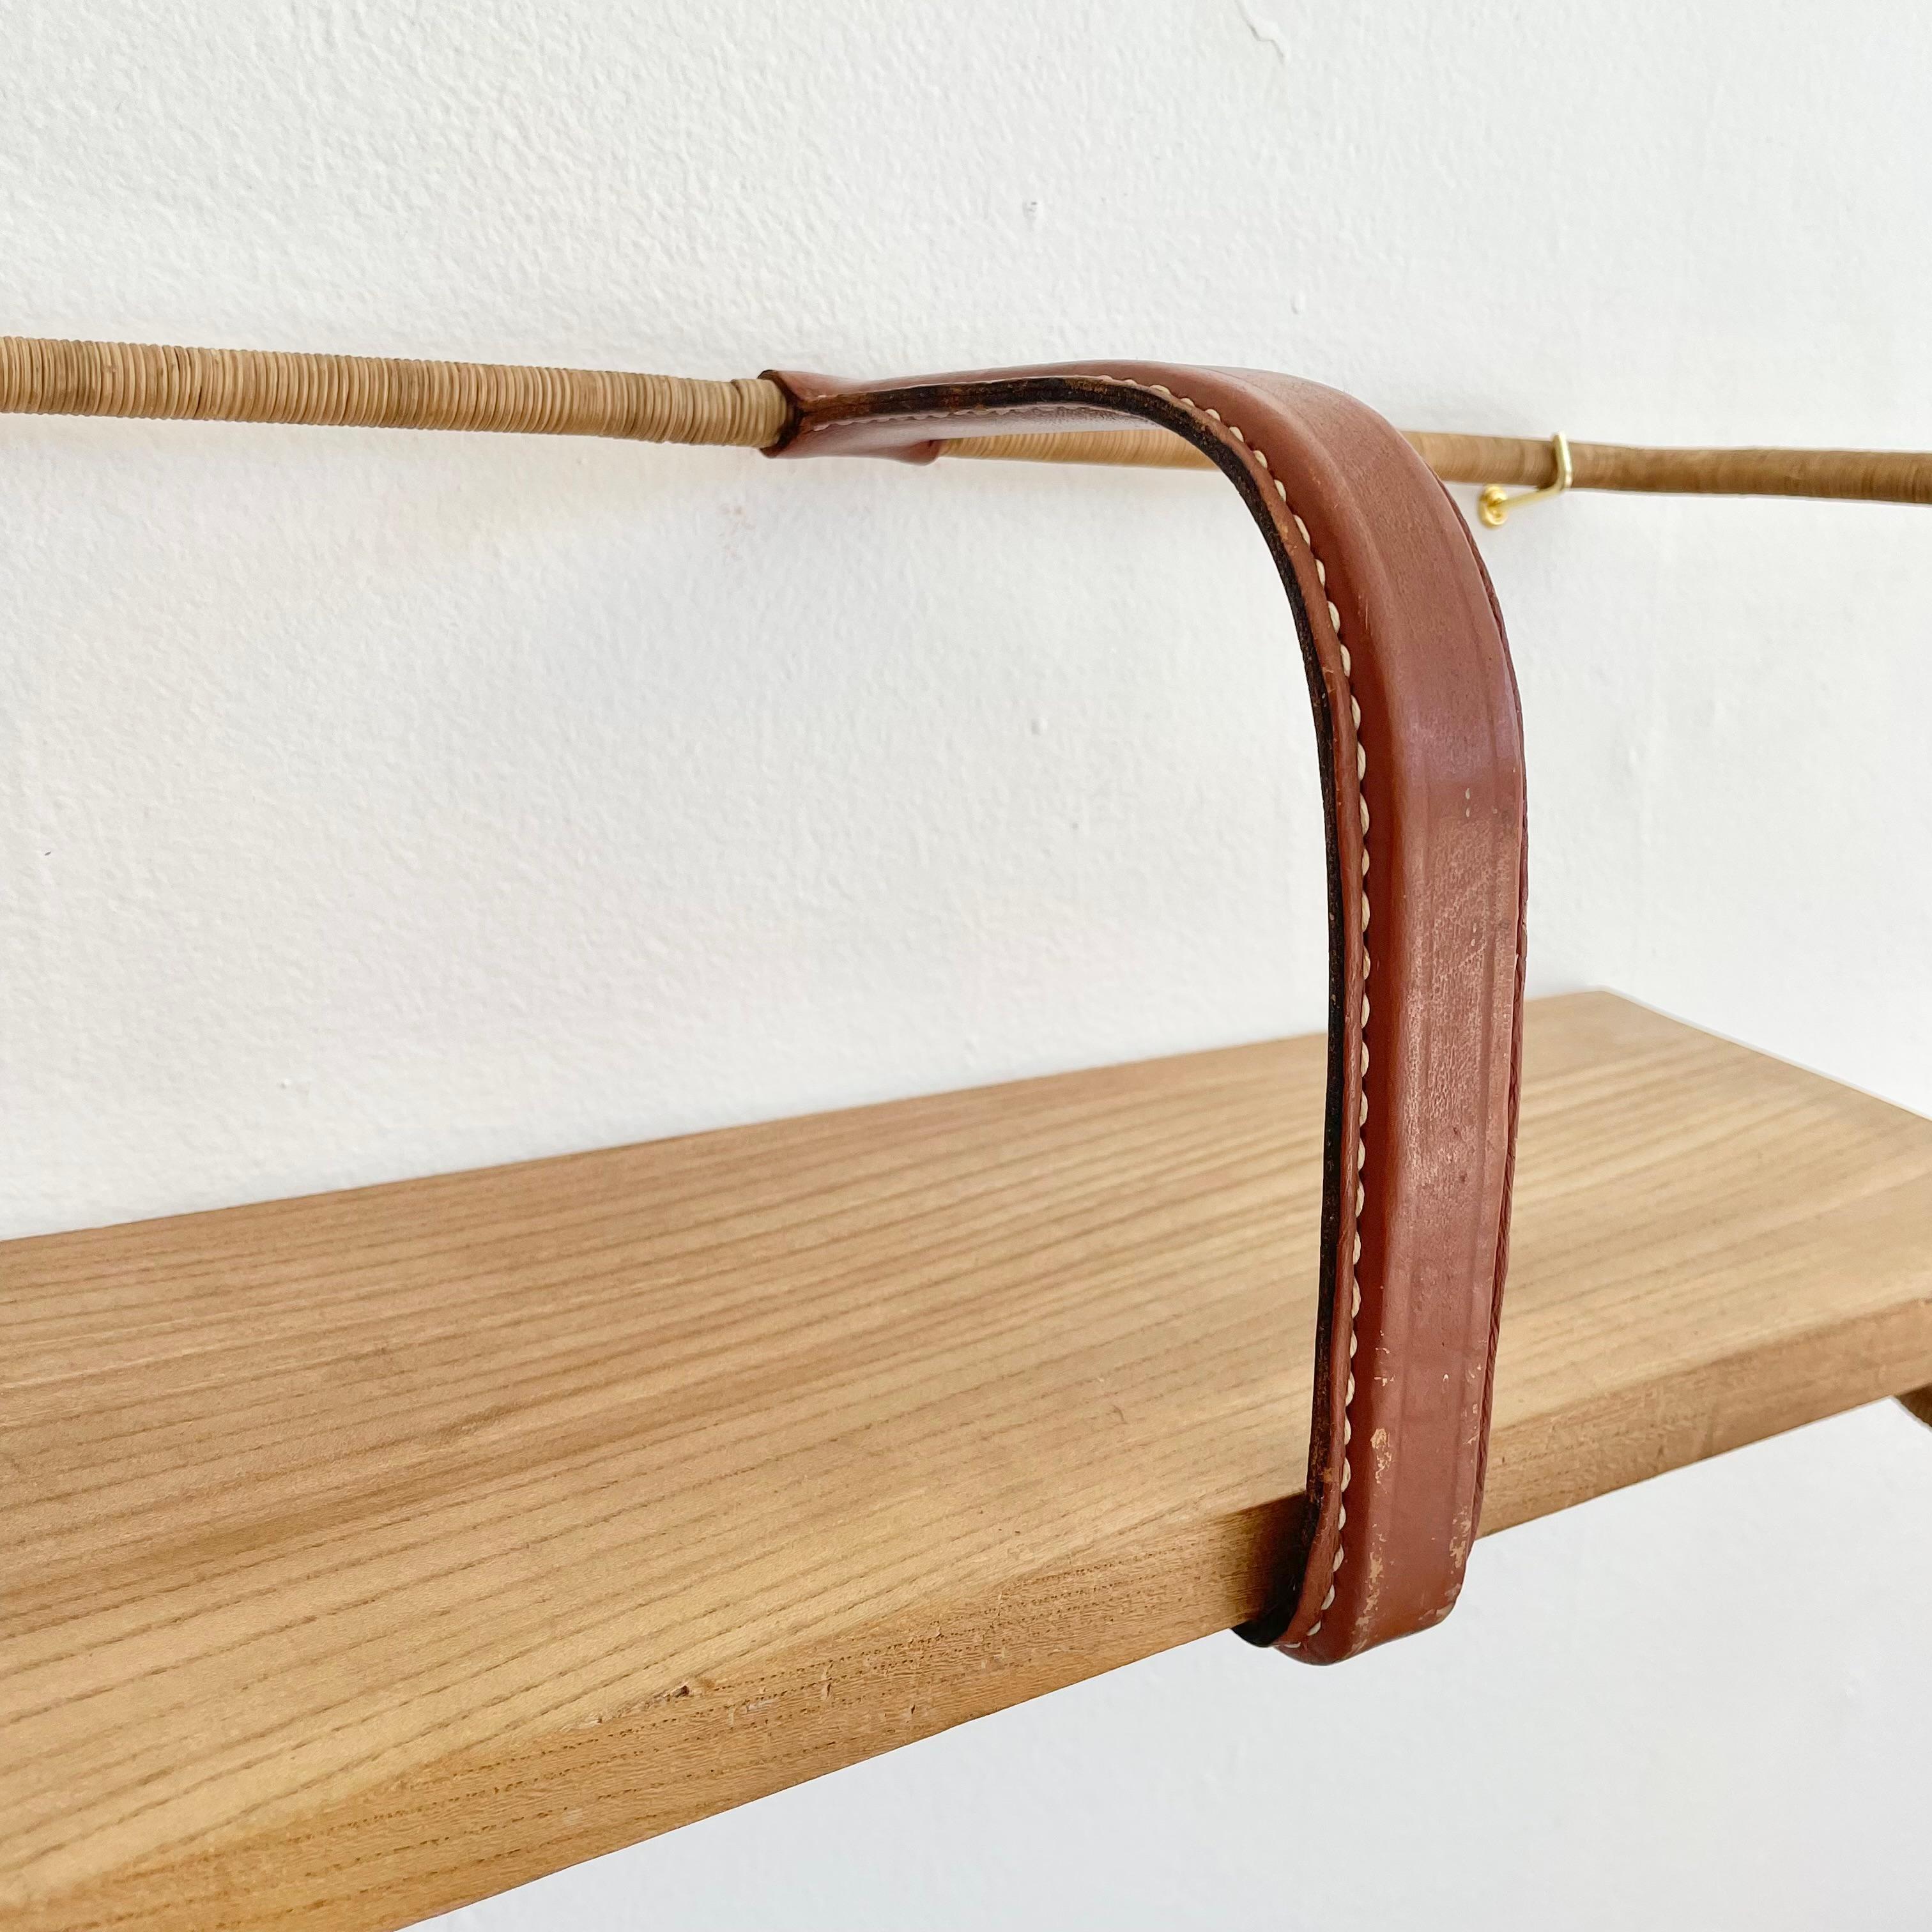 Metal Jacques Adnet Leather, Wood and Twine Shelf, 1950s France For Sale